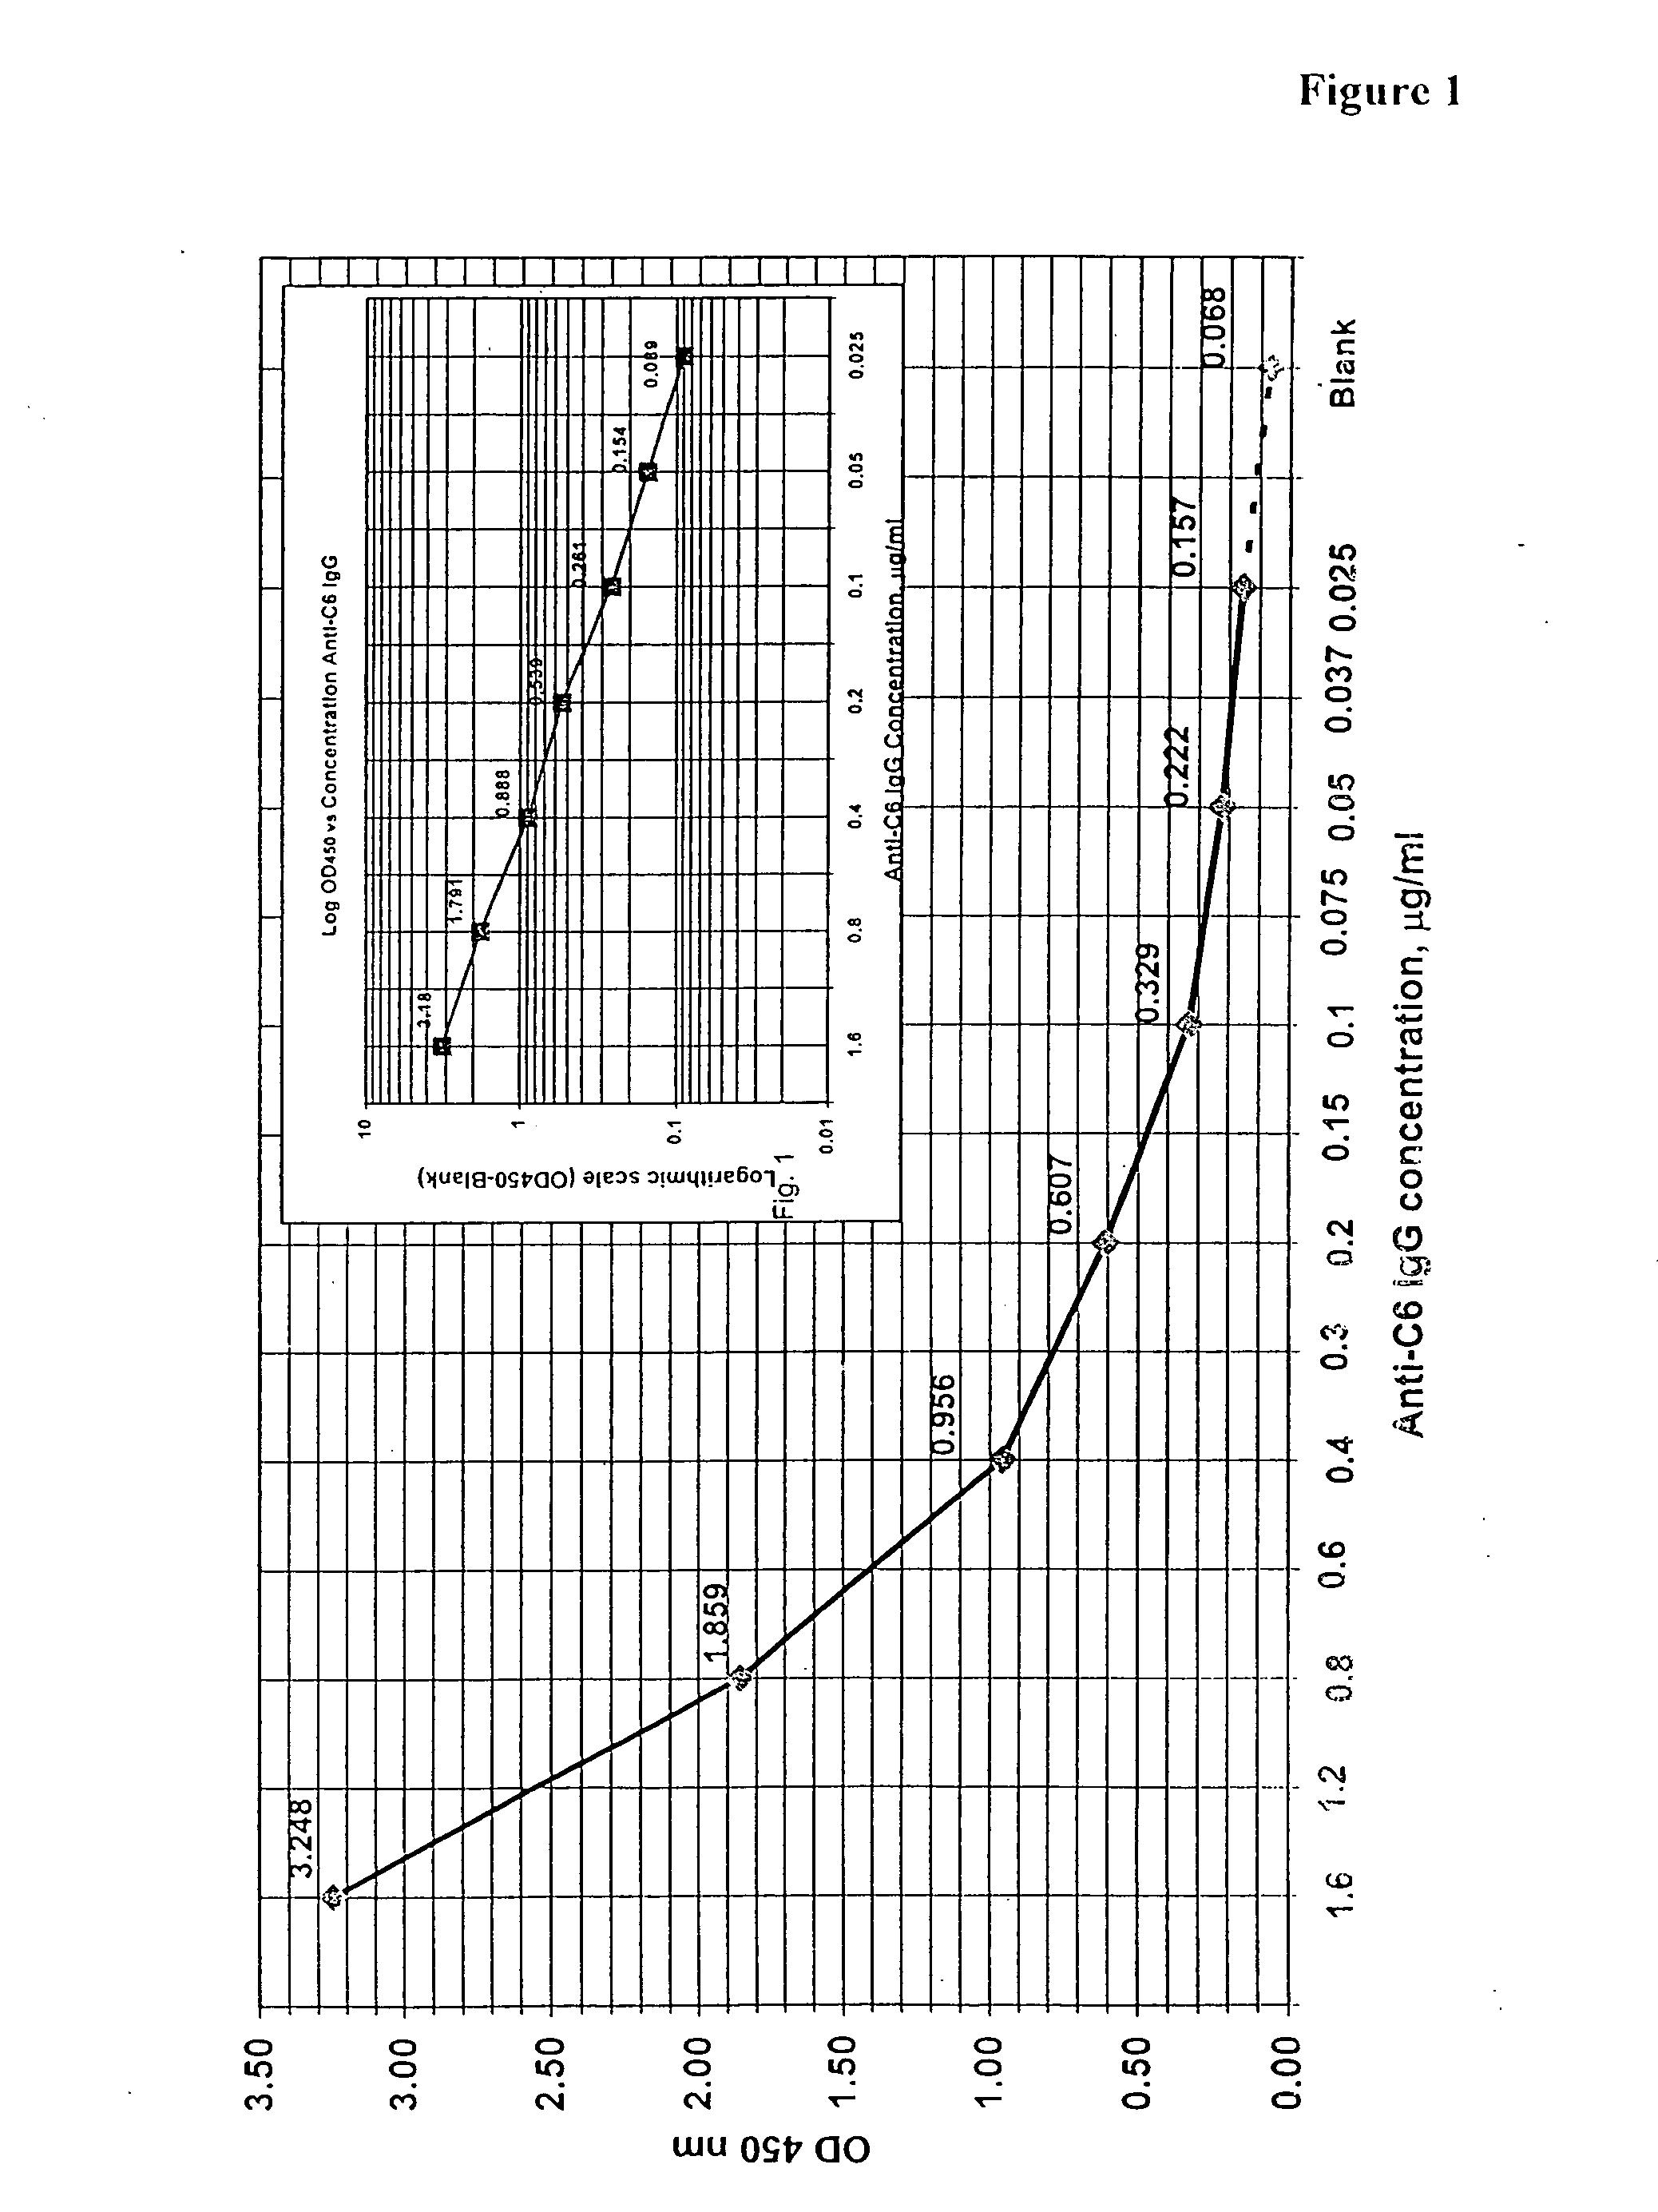 Systems and methods for detection of analytes in biological fluids